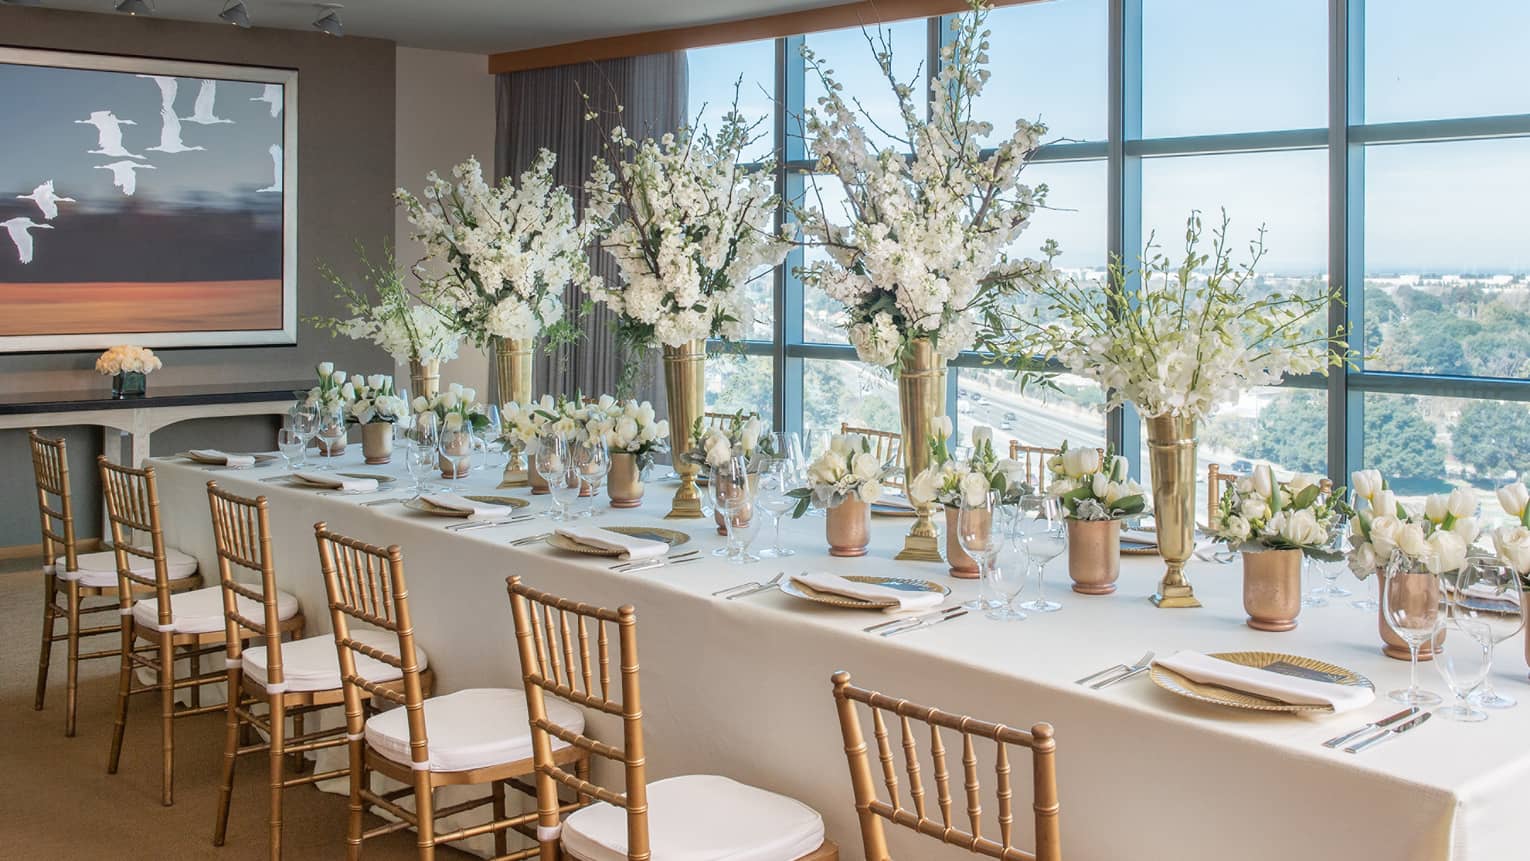 Sky Suite long dining table with white linens, flower centrepieces by window overlooking Palo Alto